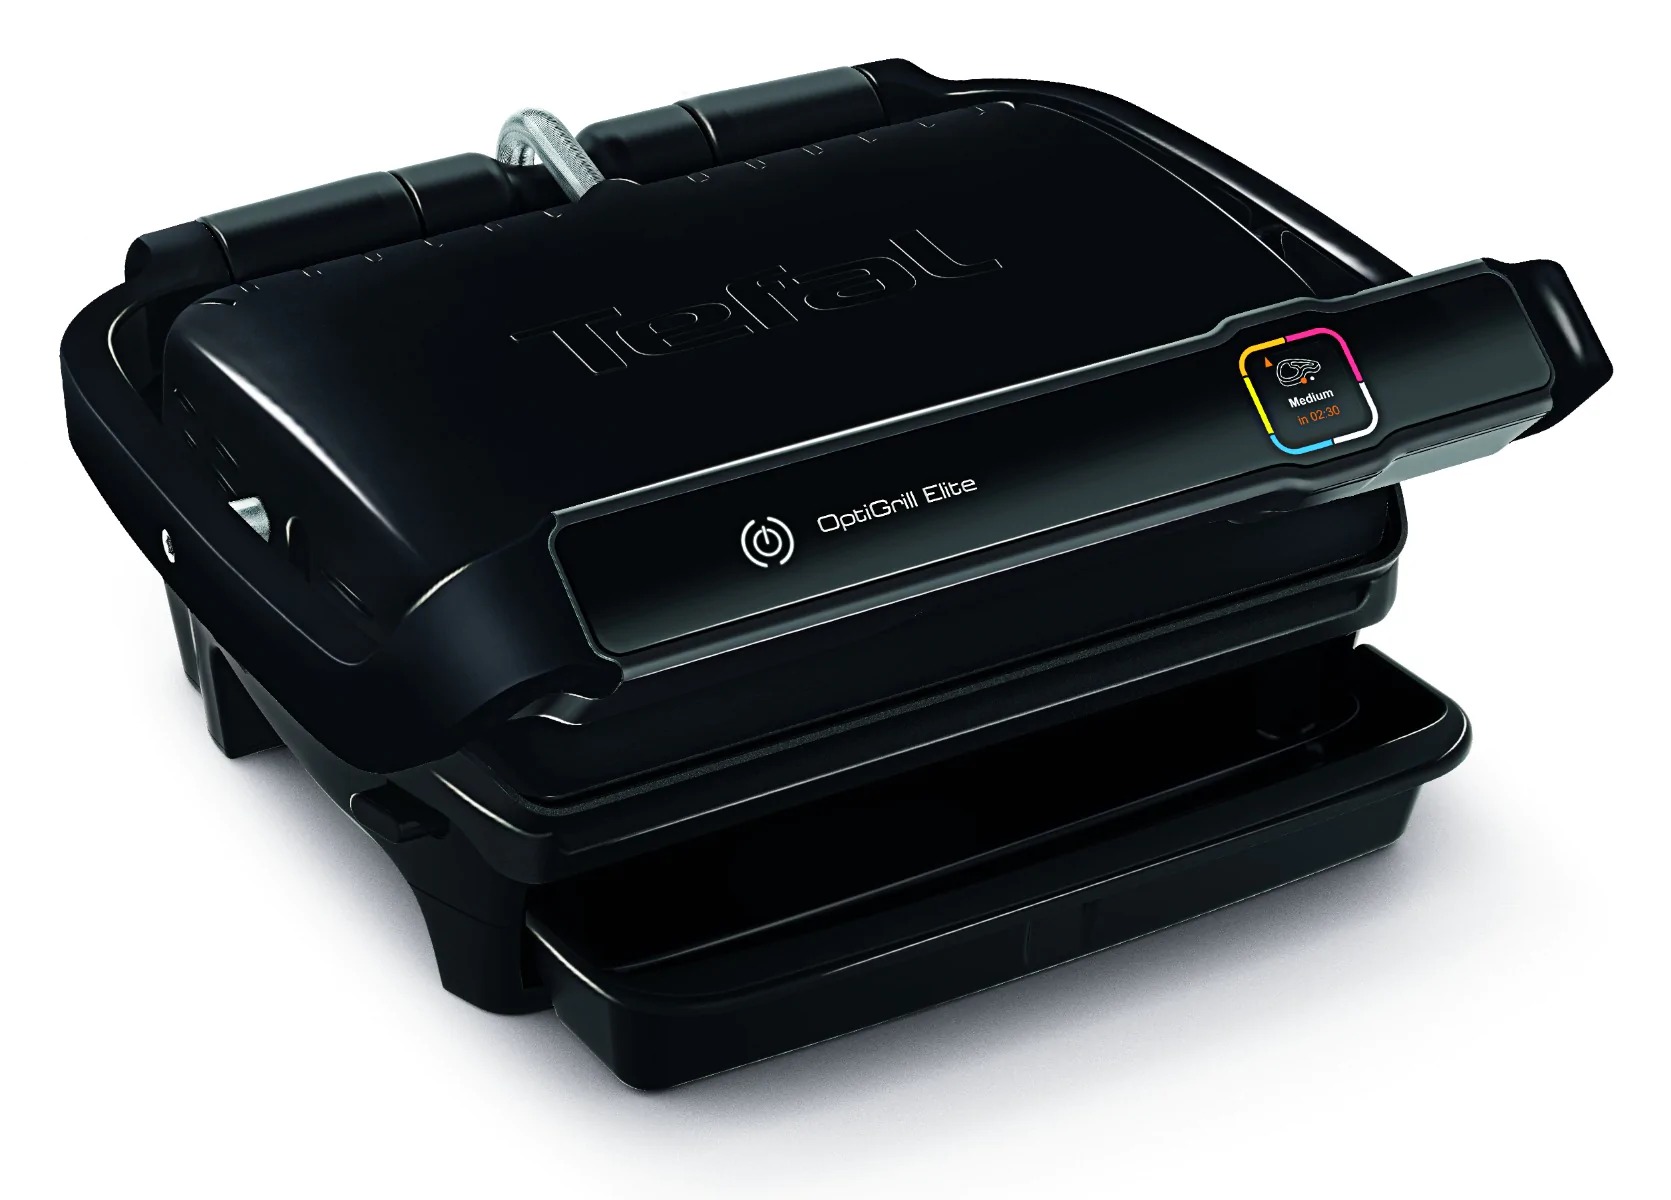 7508 specifications prices, Dnepropetrovsk, Odessa Lviv, buy > Elite GC black Tefal price (GC750830) OptiGrill contact grill: reviews, Ukraine: - stores Kyiv, in